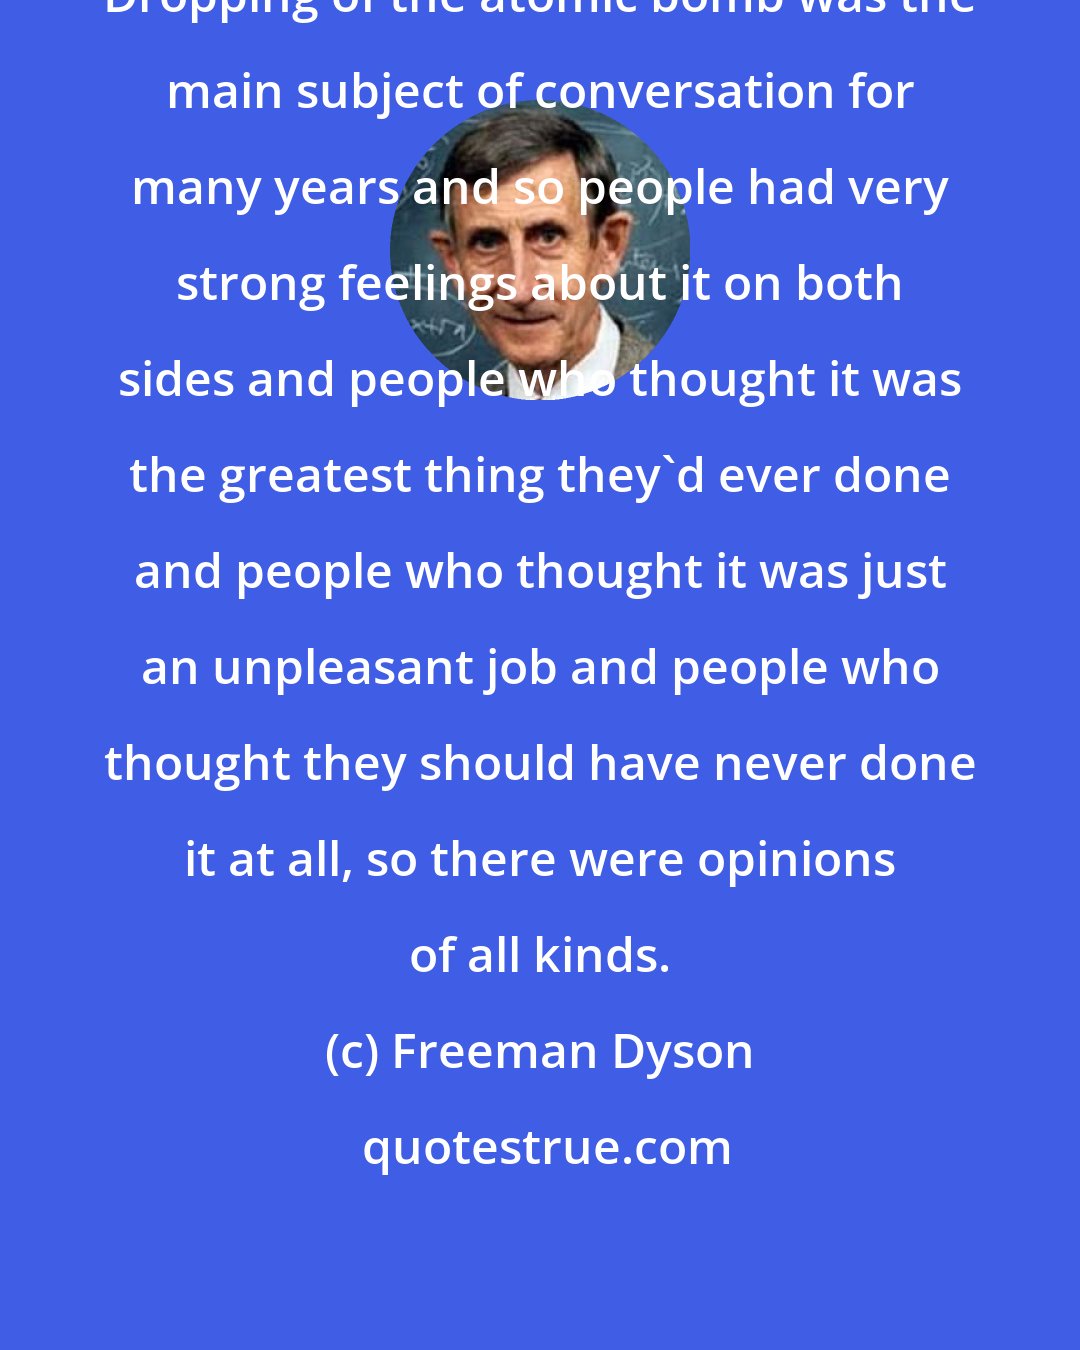 Freeman Dyson: Dropping of the atomic bomb was the main subject of conversation for many years and so people had very strong feelings about it on both sides and people who thought it was the greatest thing they'd ever done and people who thought it was just an unpleasant job and people who thought they should have never done it at all, so there were opinions of all kinds.